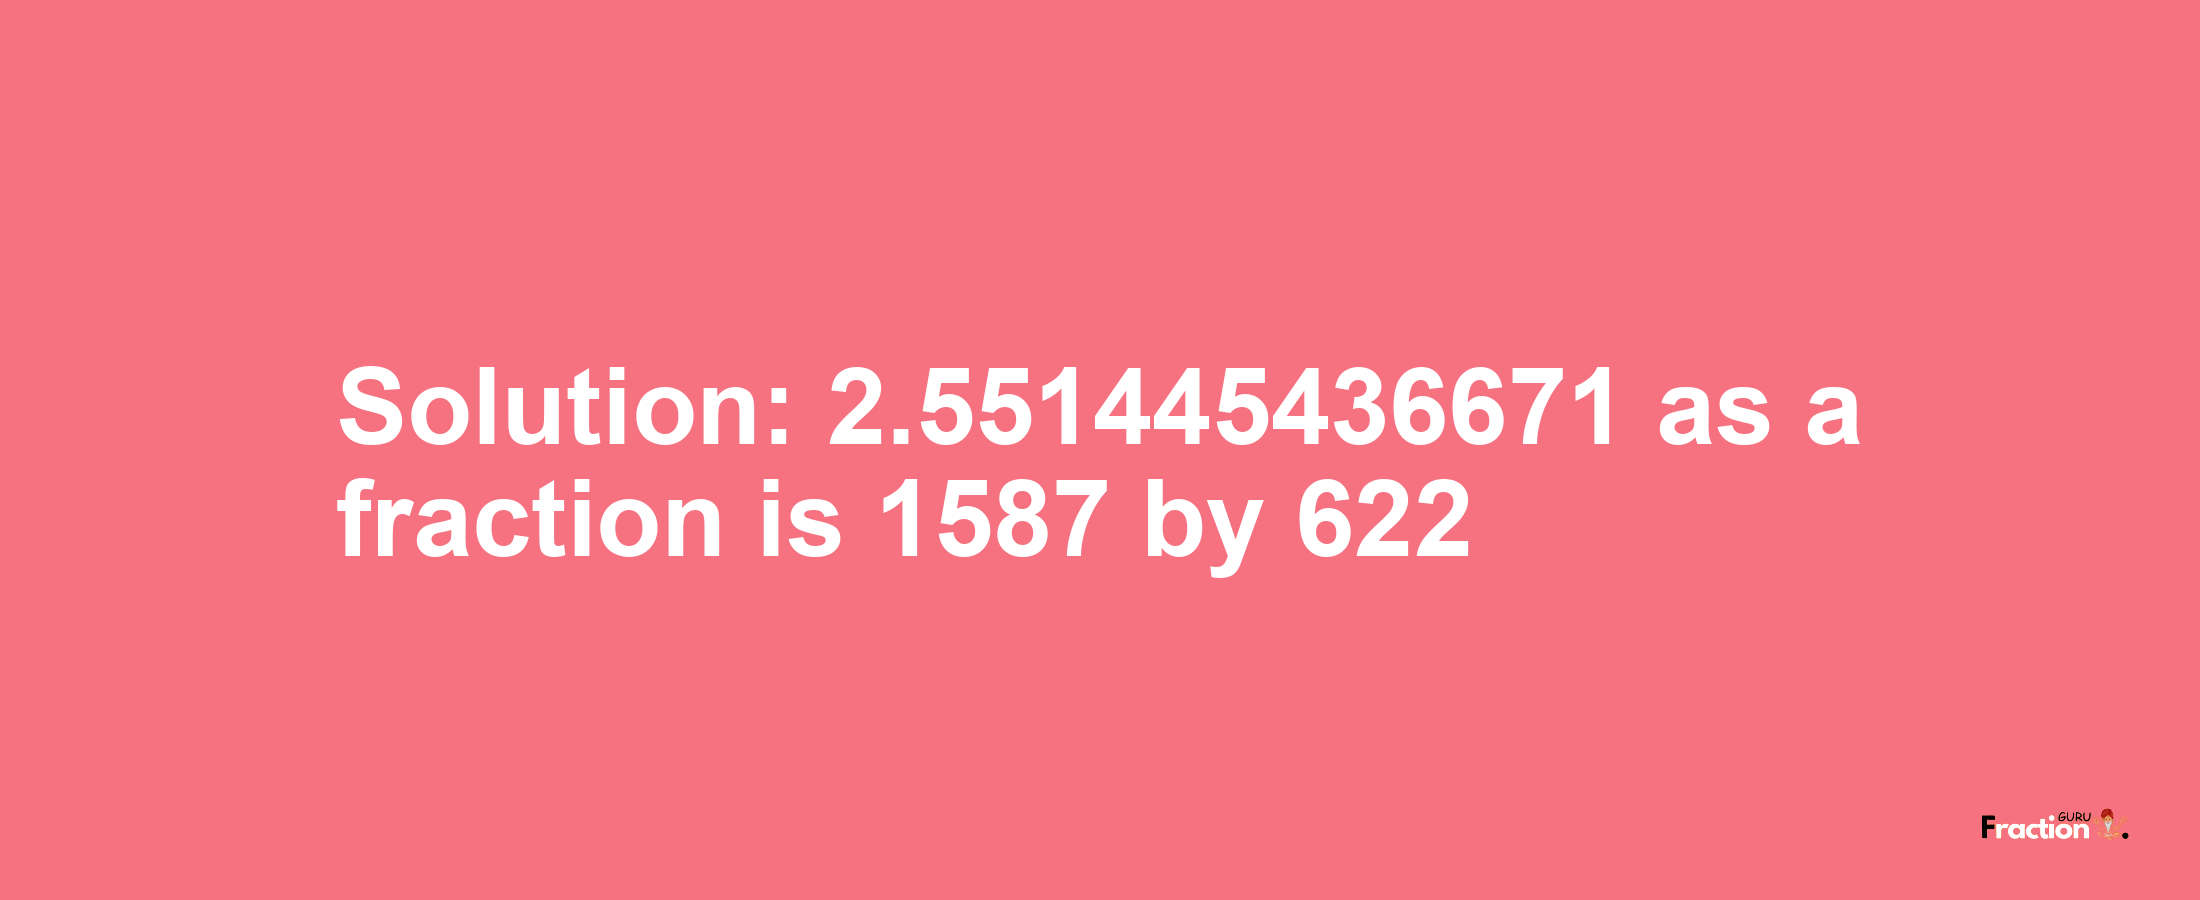 Solution:2.551445436671 as a fraction is 1587/622